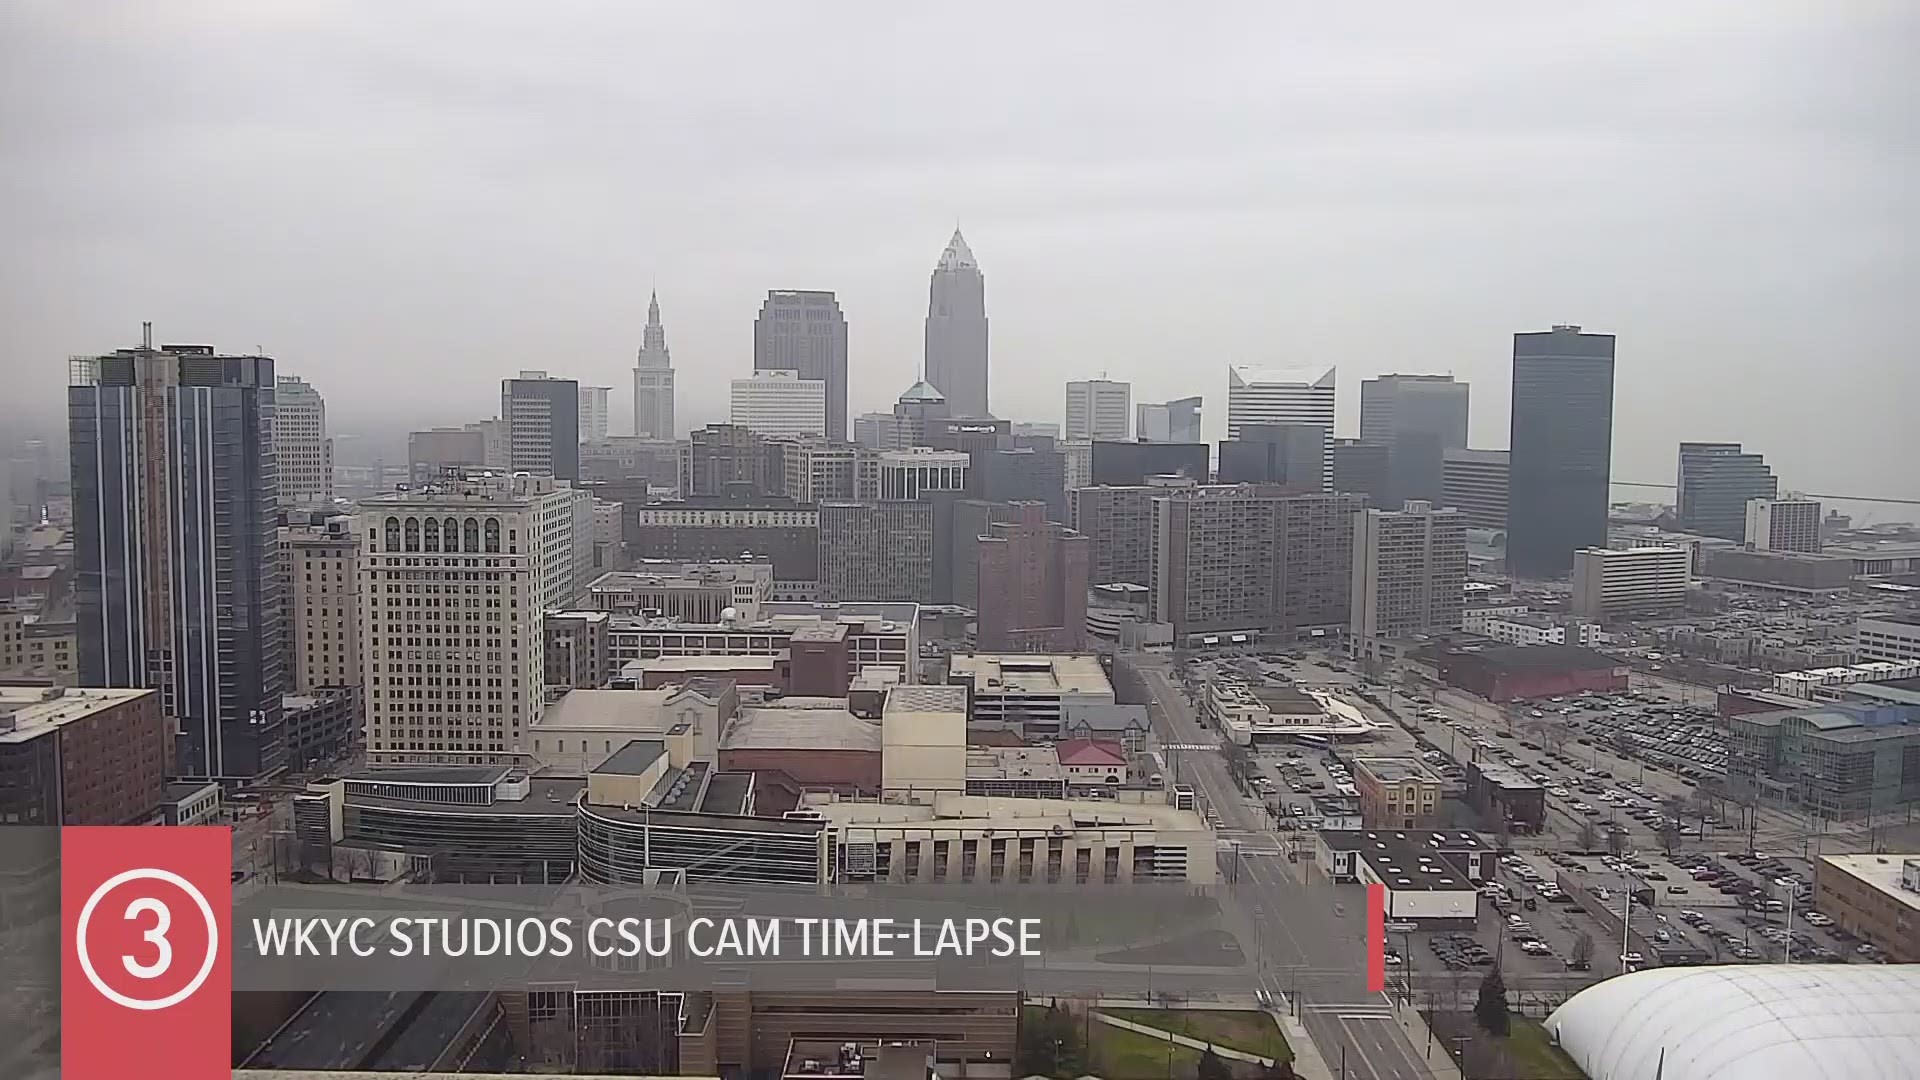 Skies were mostly cloudy across northern Ohio on Thursday. Here's today's weather time-lapse from the WKYC Studios CSU Cam. #3weather